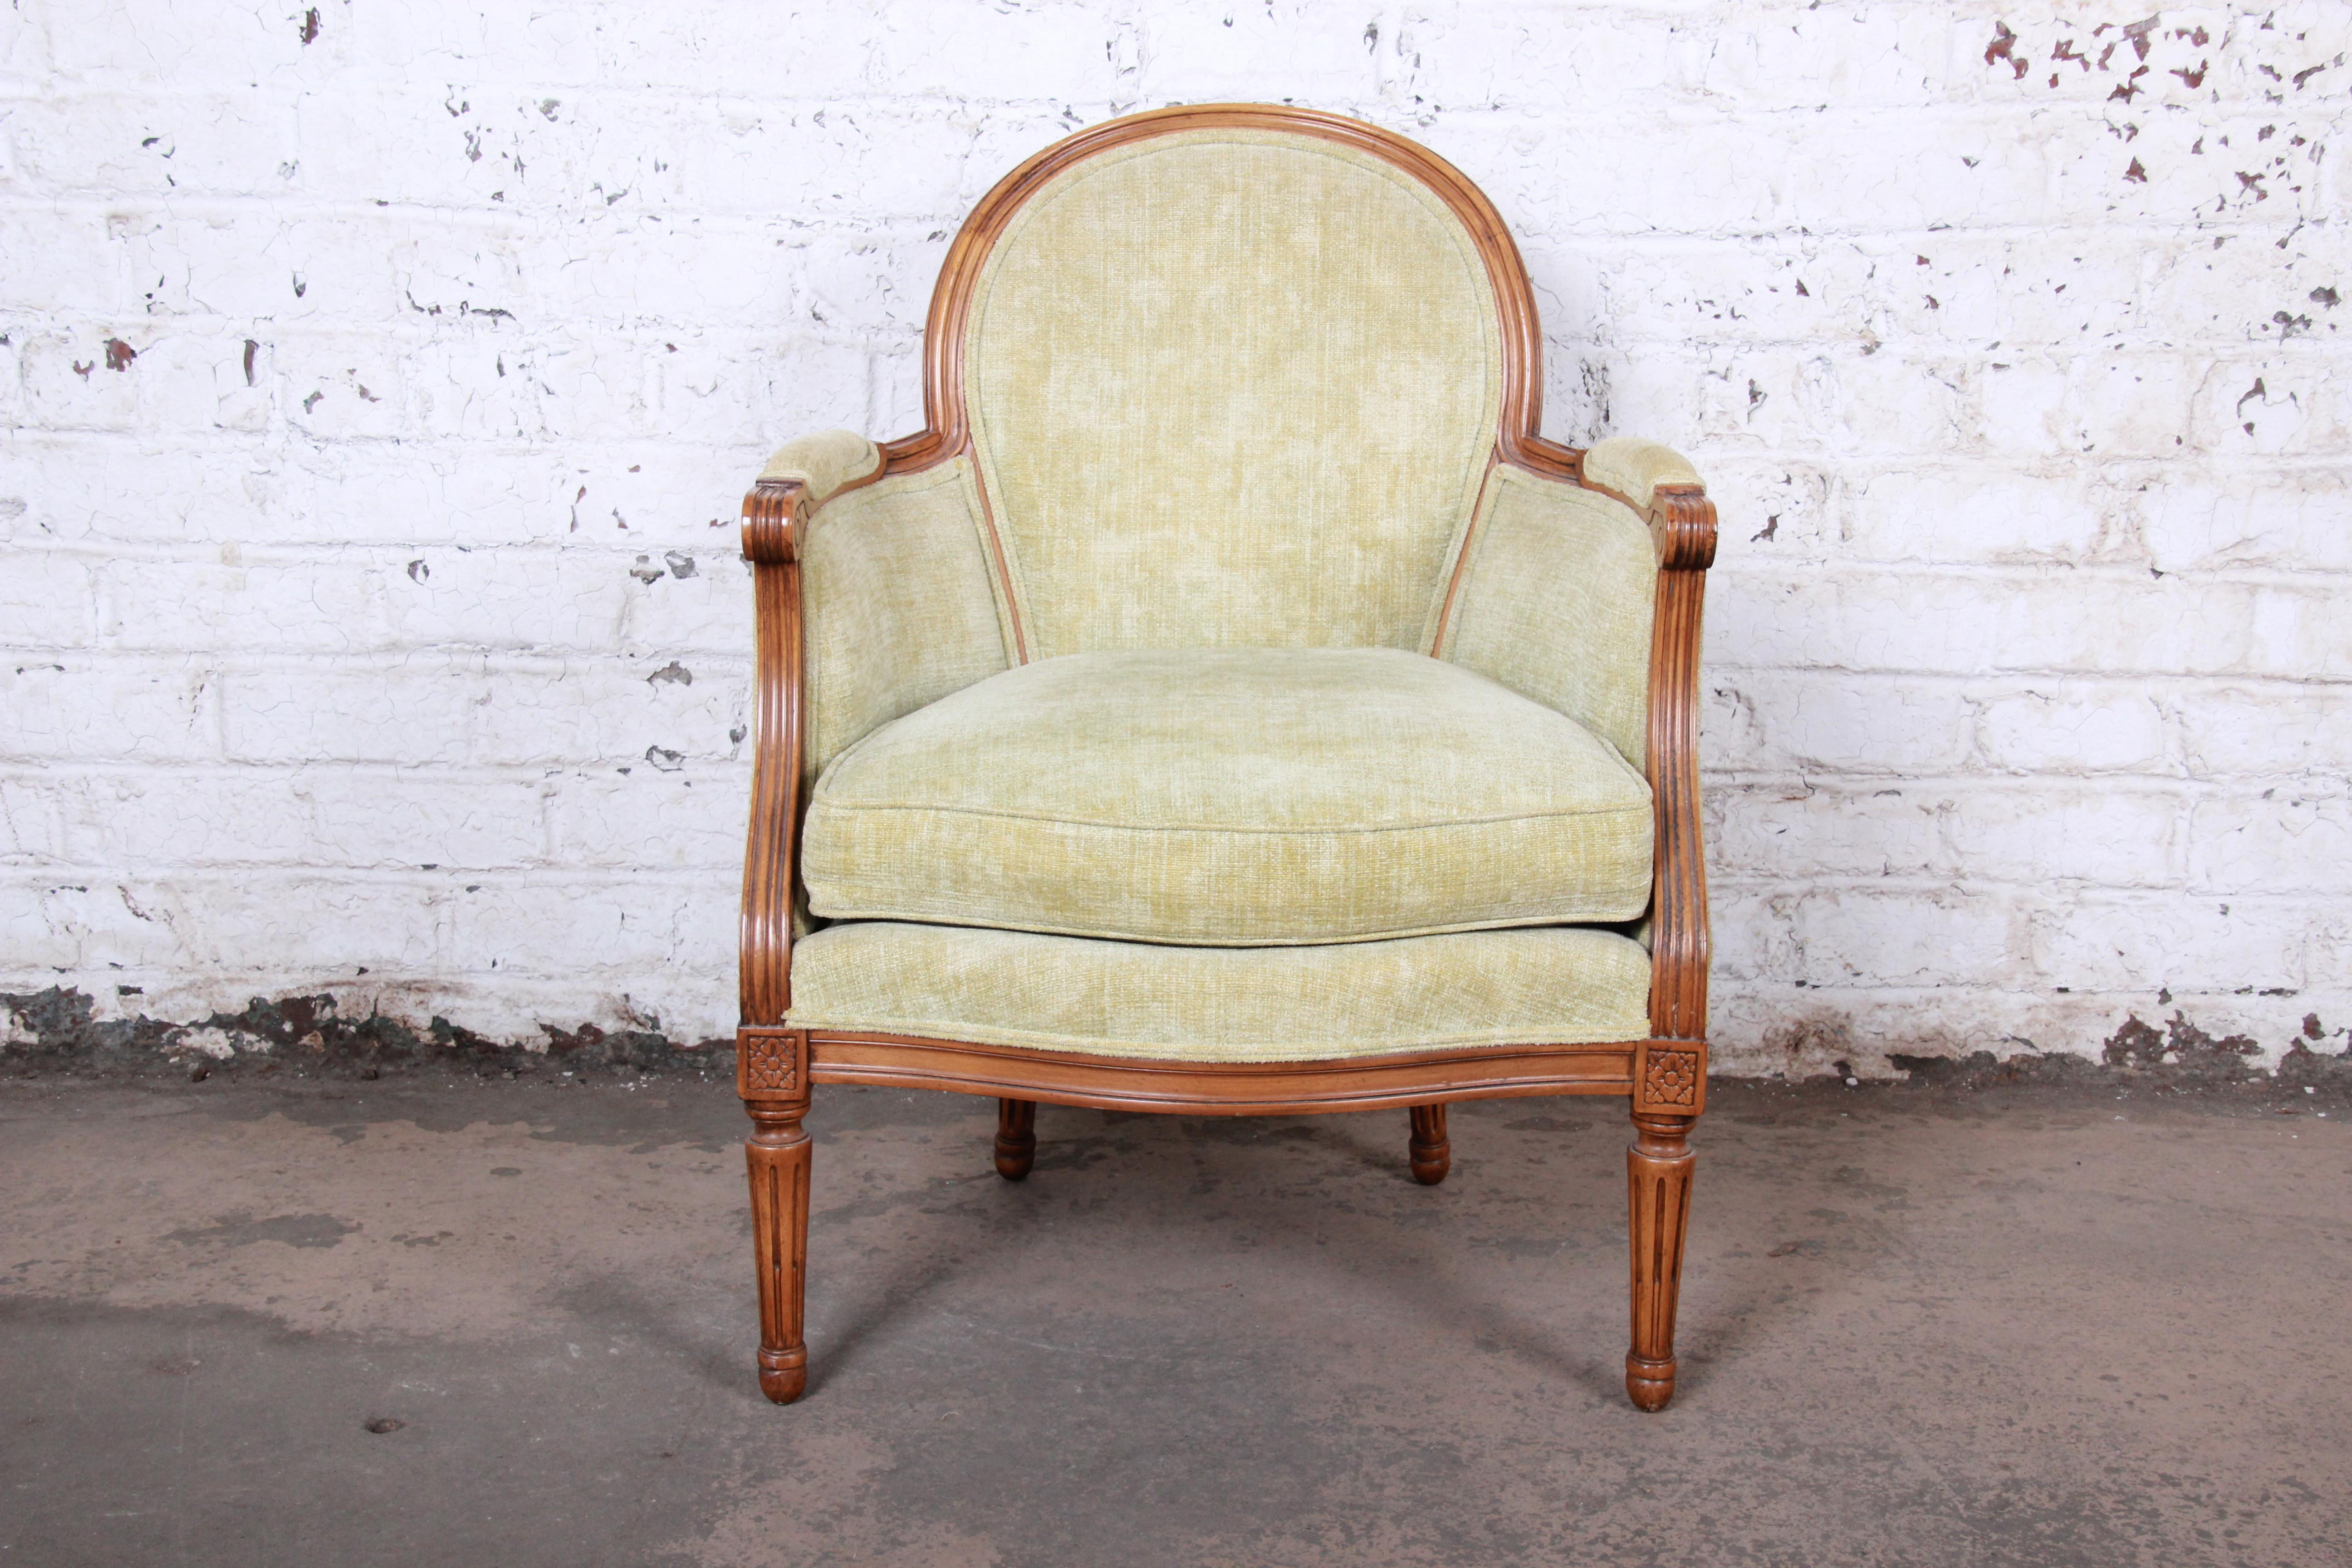 Upholstery Baker Furniture French Provincial Louis XVI Fauteuils, Pair